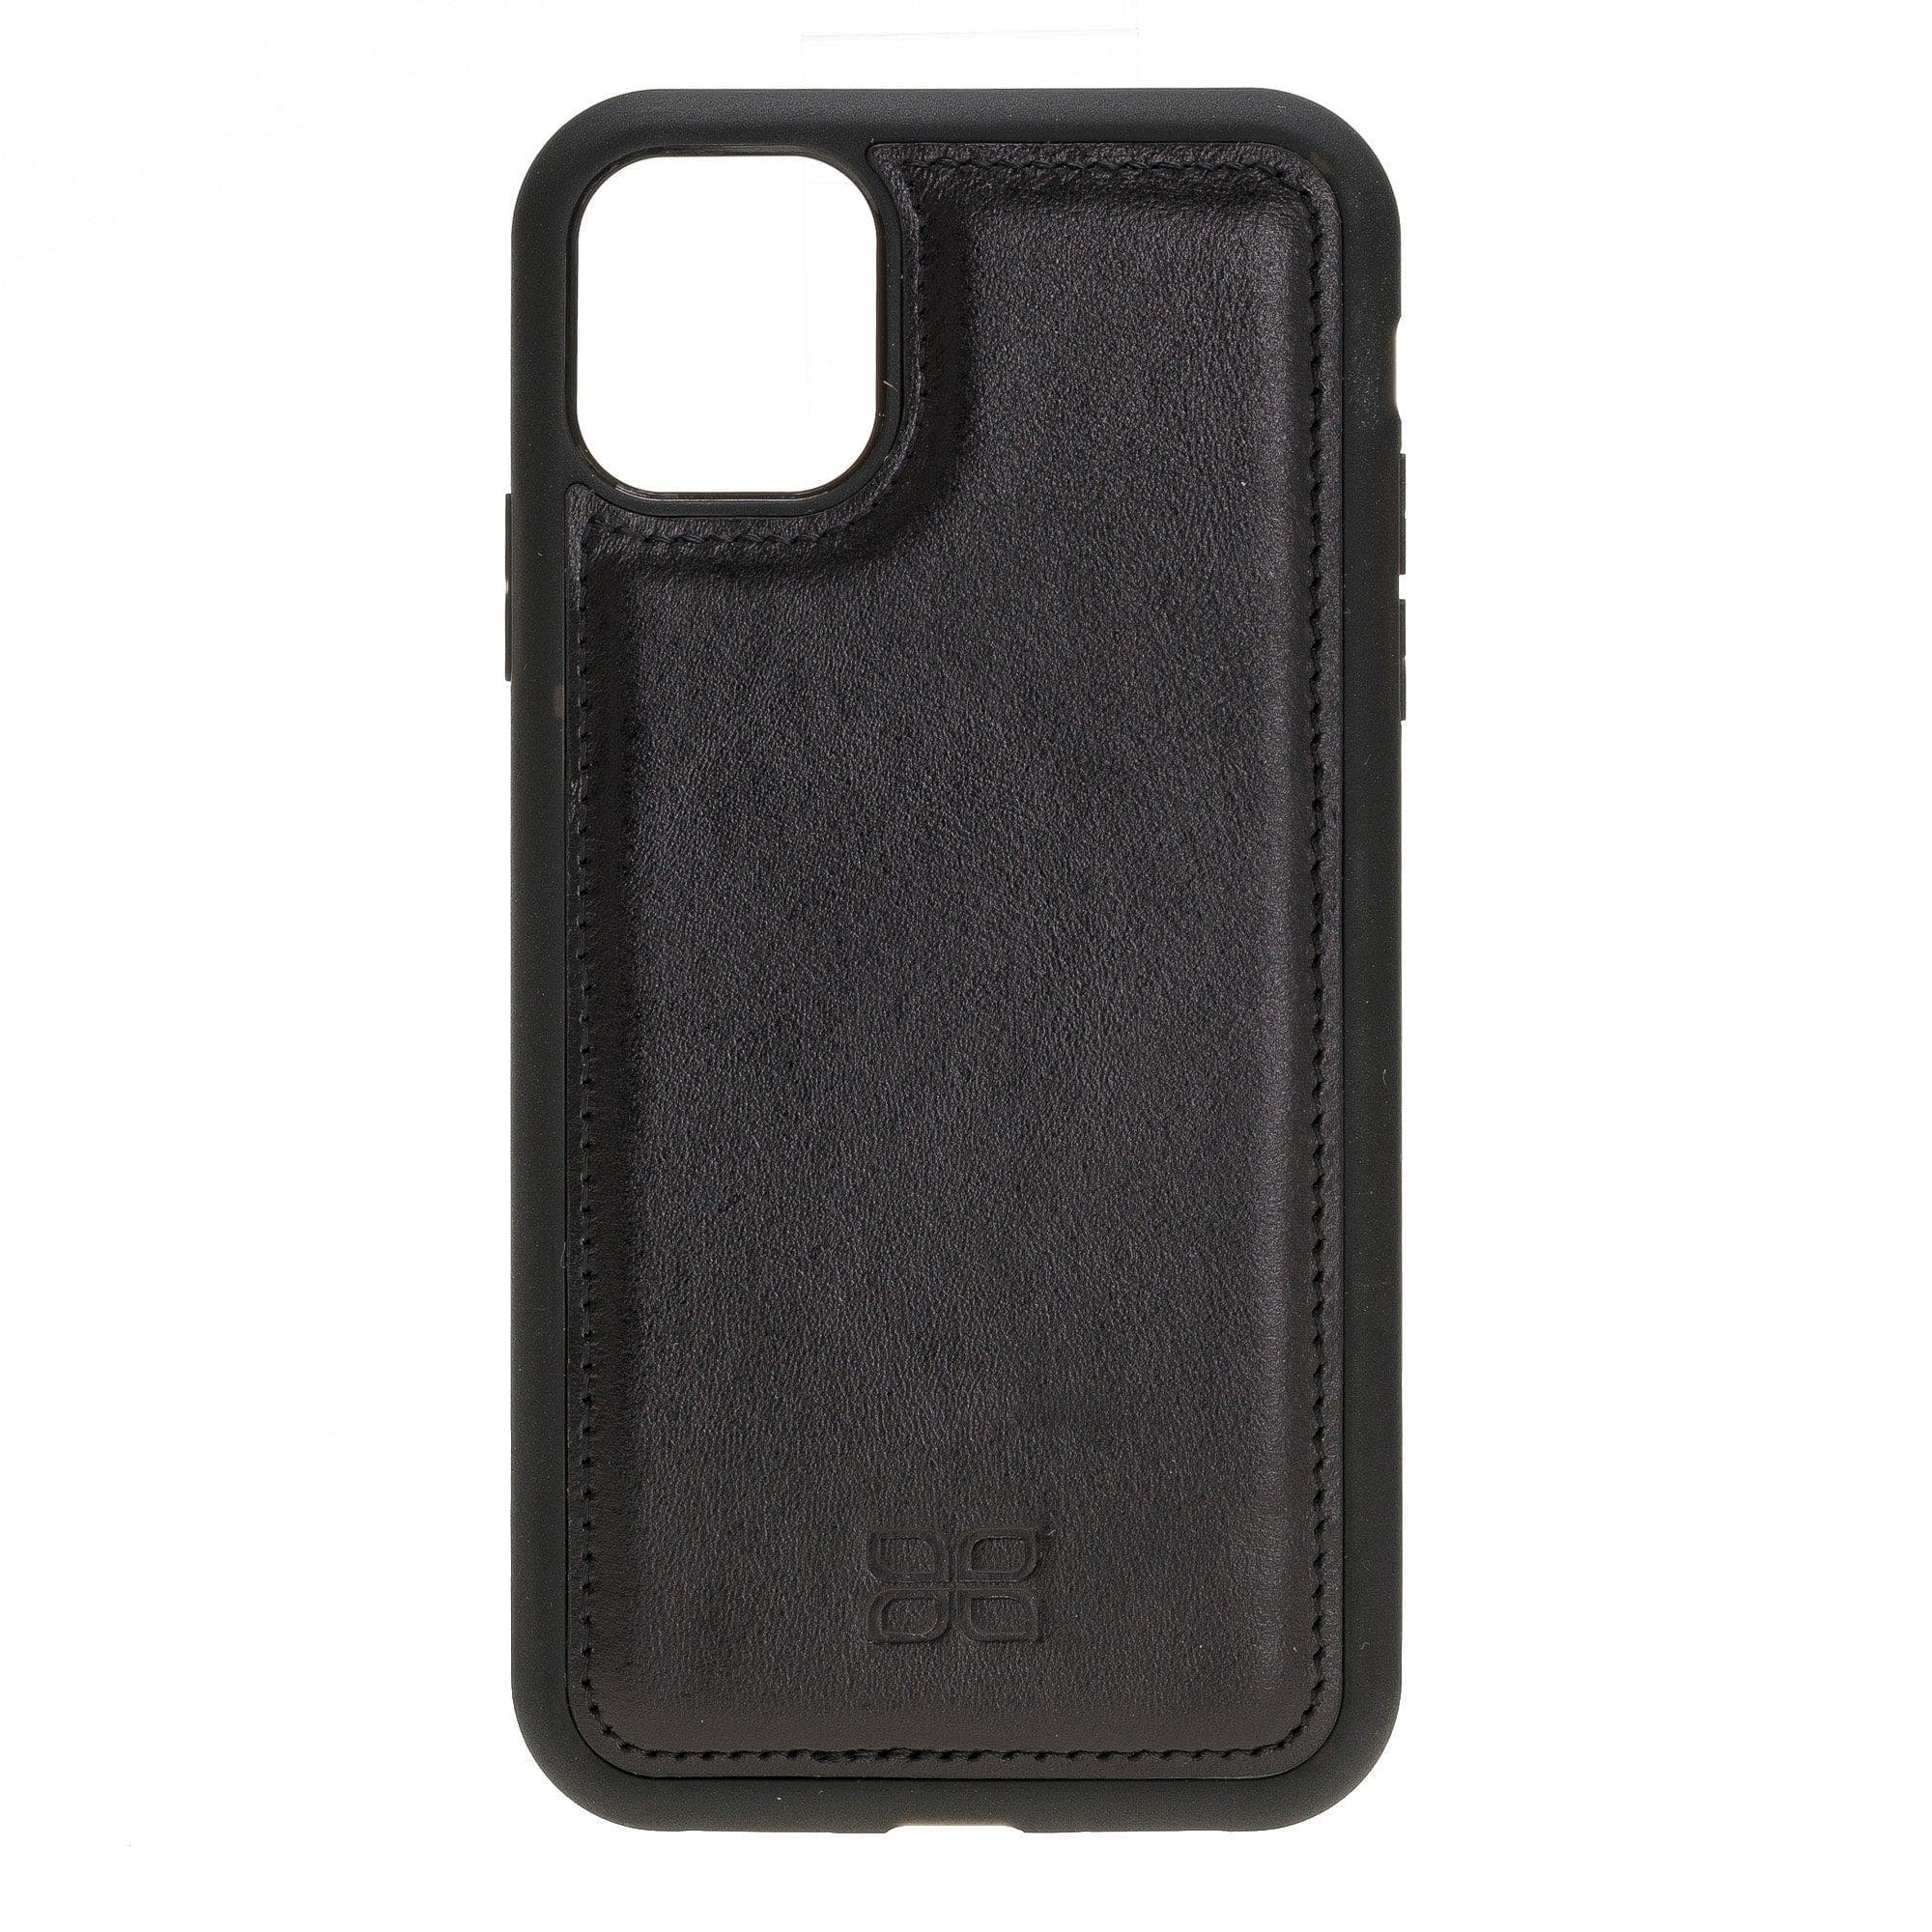 Flex Cover Leather Back Cover Case for Apple iPhone 11 Series iPhone 11 6.1" / Black Bouletta LTD